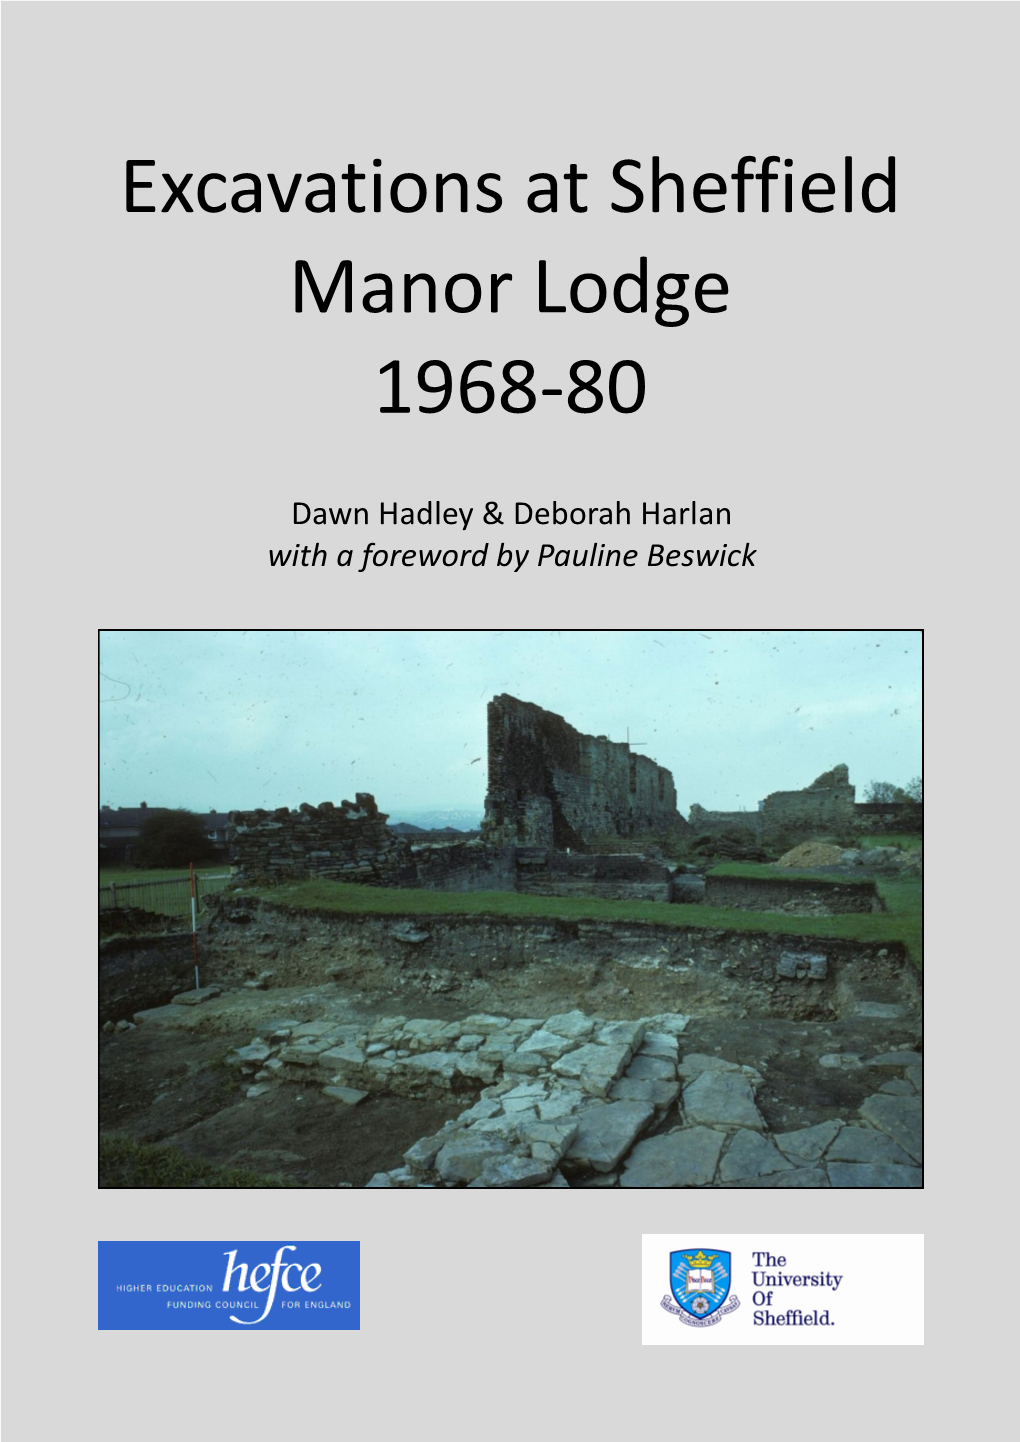 Excavations at Sheffield Manor Lodge 1968-80